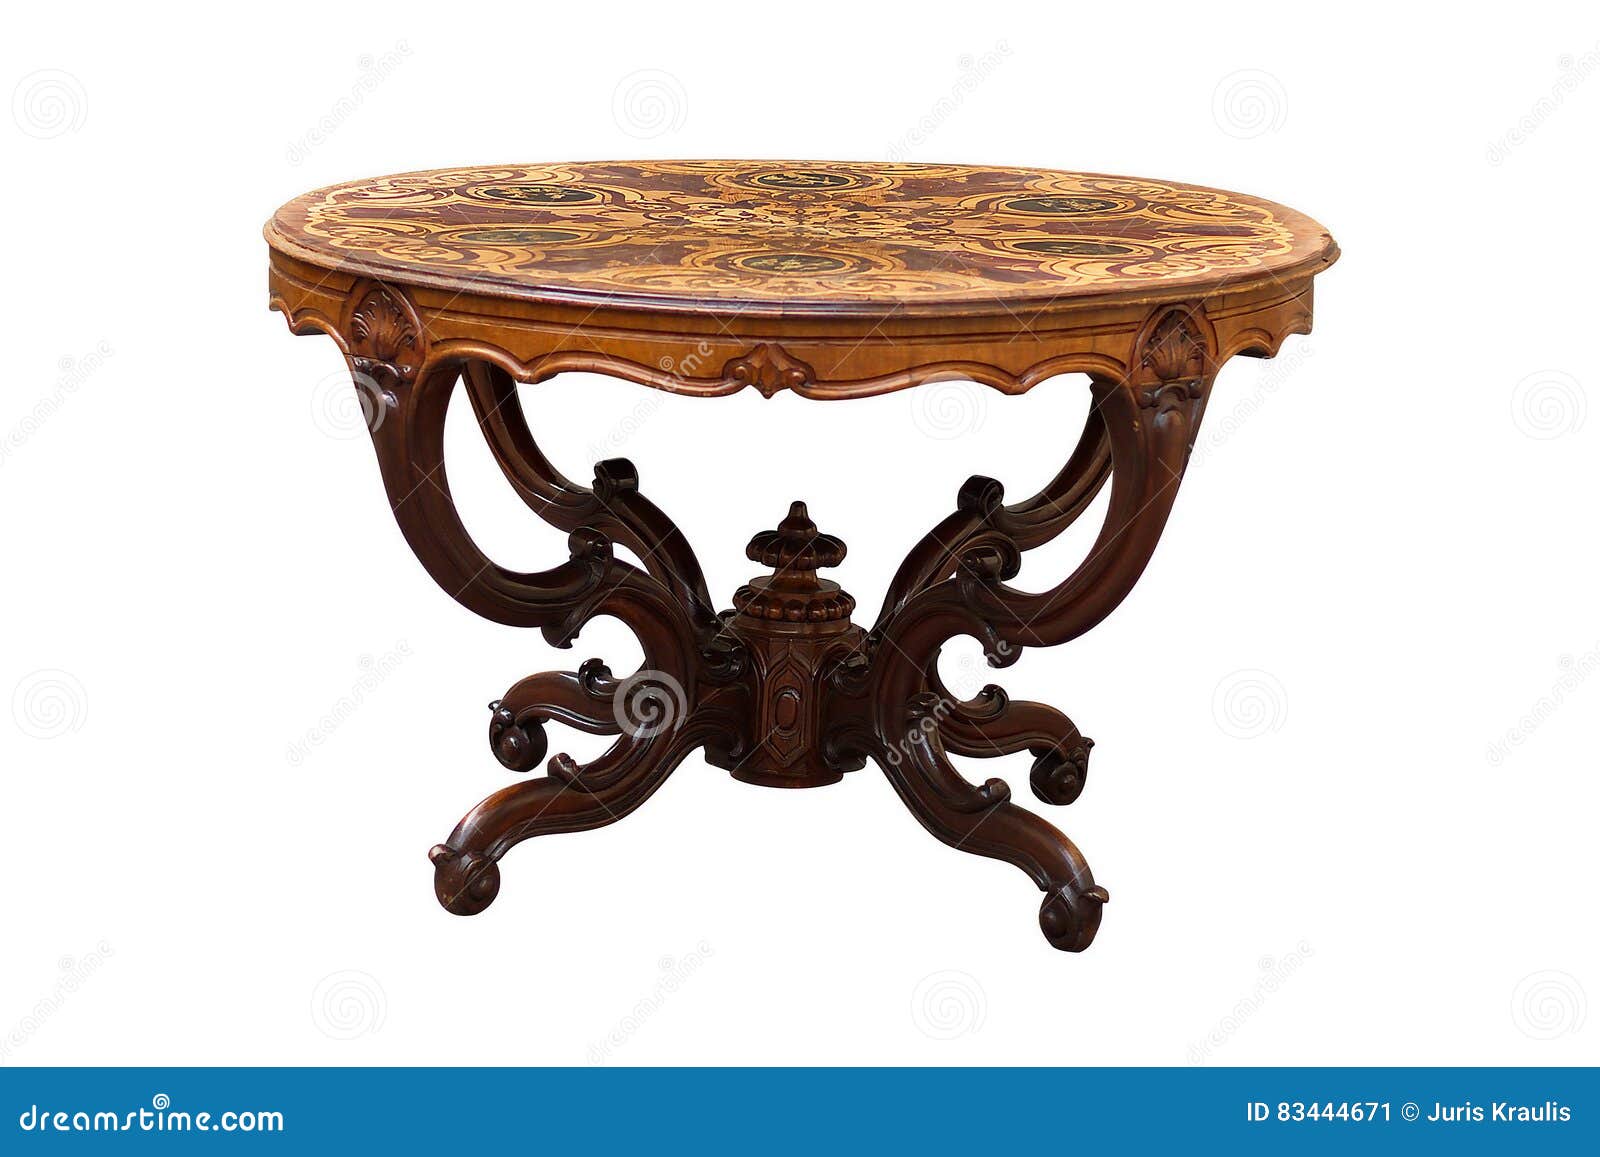 antique round marquetry table